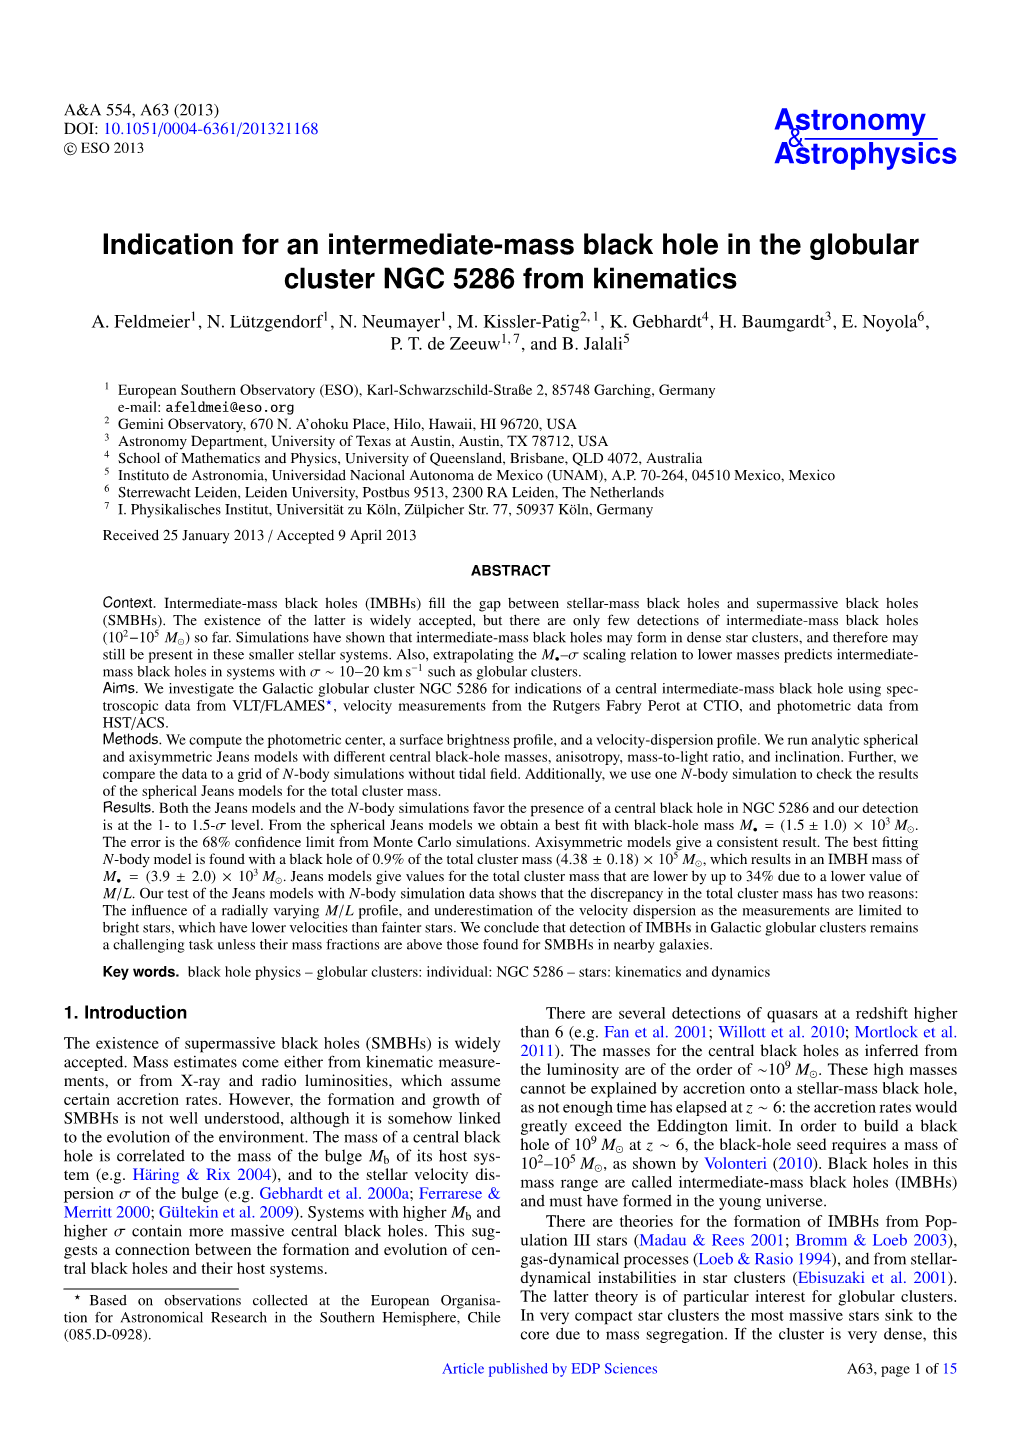 Indication for an Intermediate-Mass Black Hole in the Globular Cluster NGC 5286 from Kinematics A